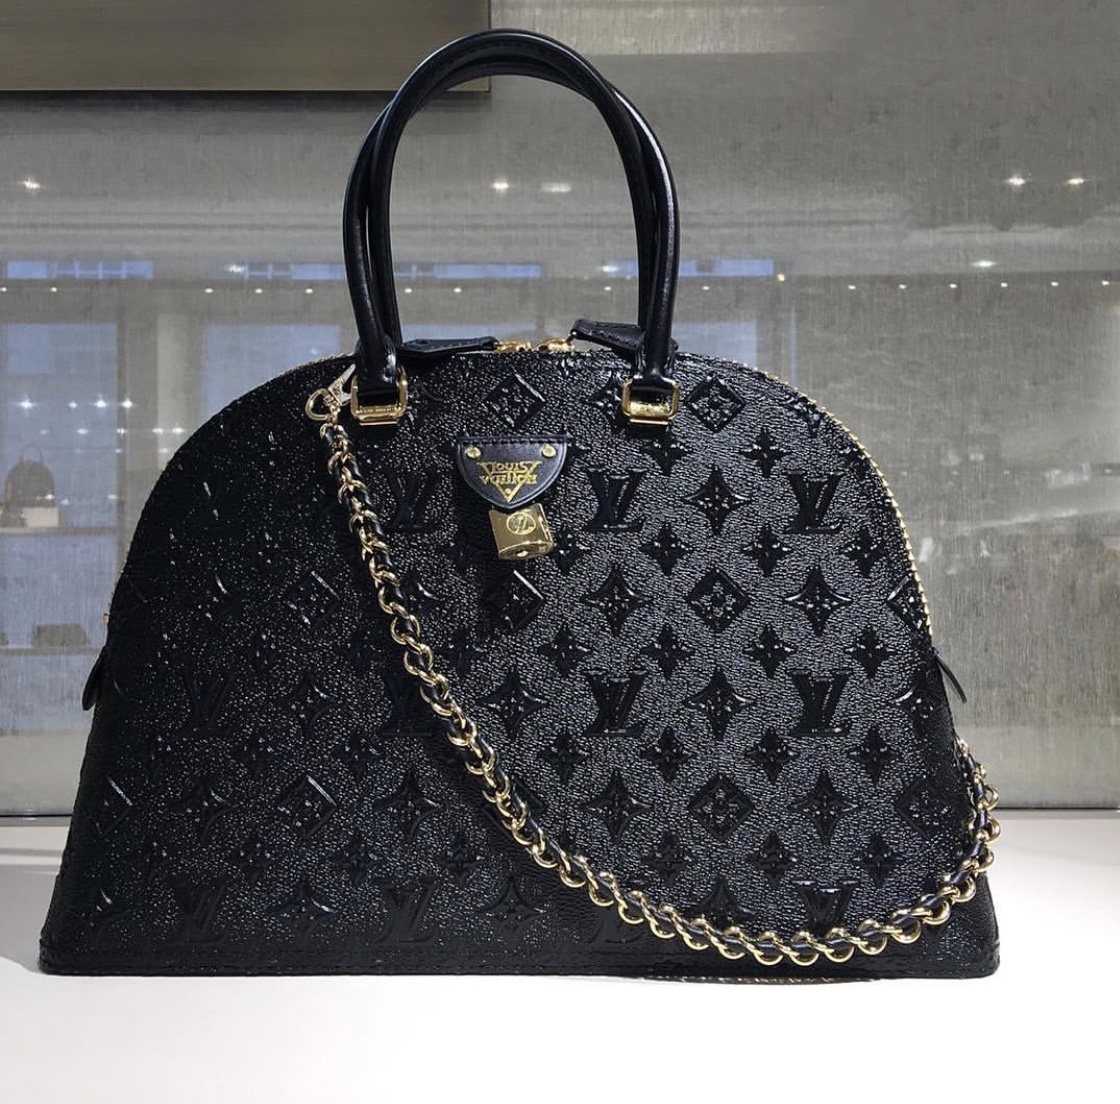 Bomb_Product_of_the_Day_LV_Moon_Alma_Bag_by_Louis_Vuitton_4